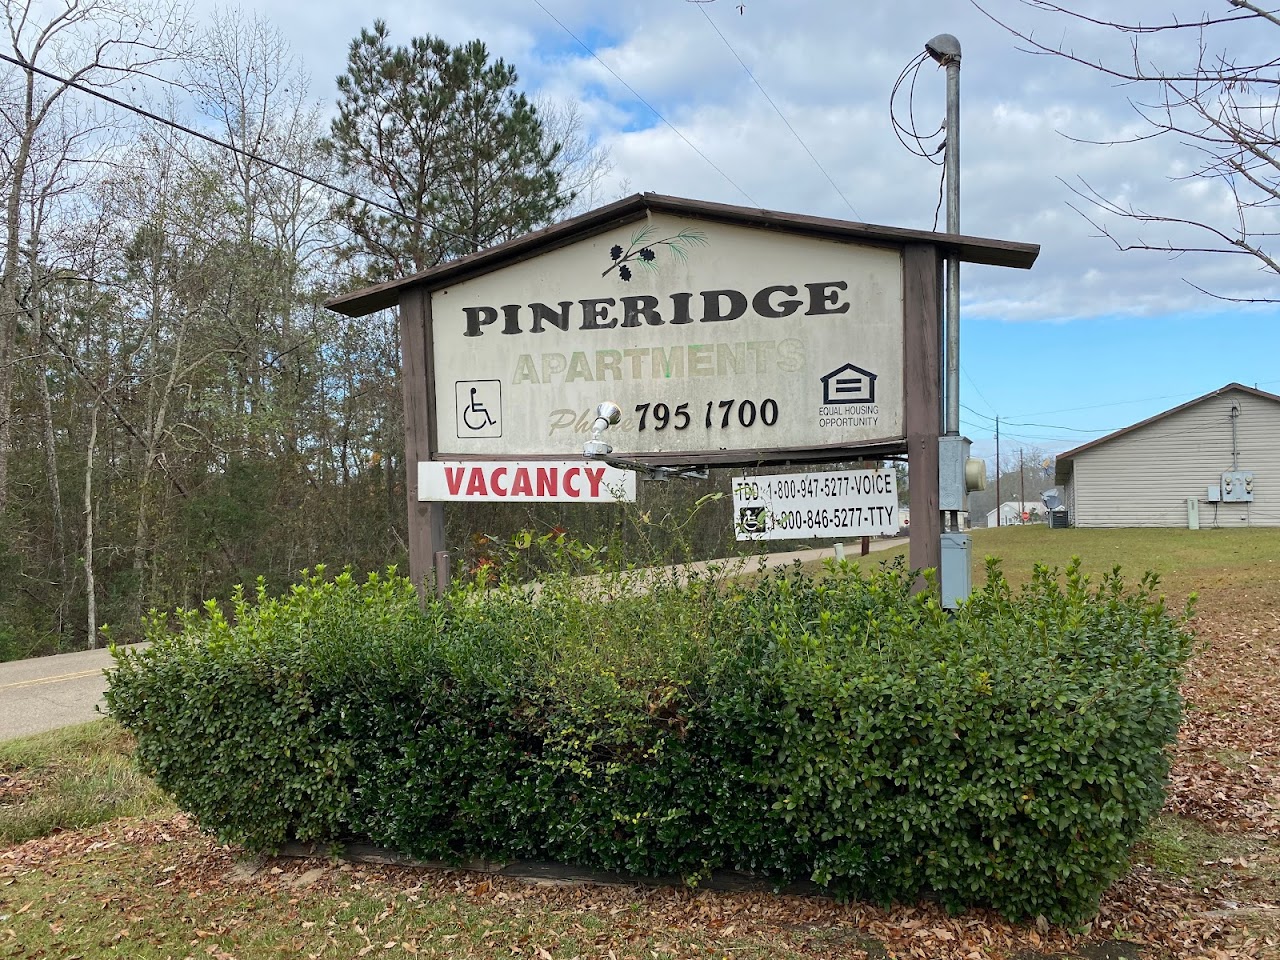 Photo of PINERIDGE APARTMENTS. Affordable housing located at 1208 JOHN D WOOD RD FRANKLINTON, LA 70438